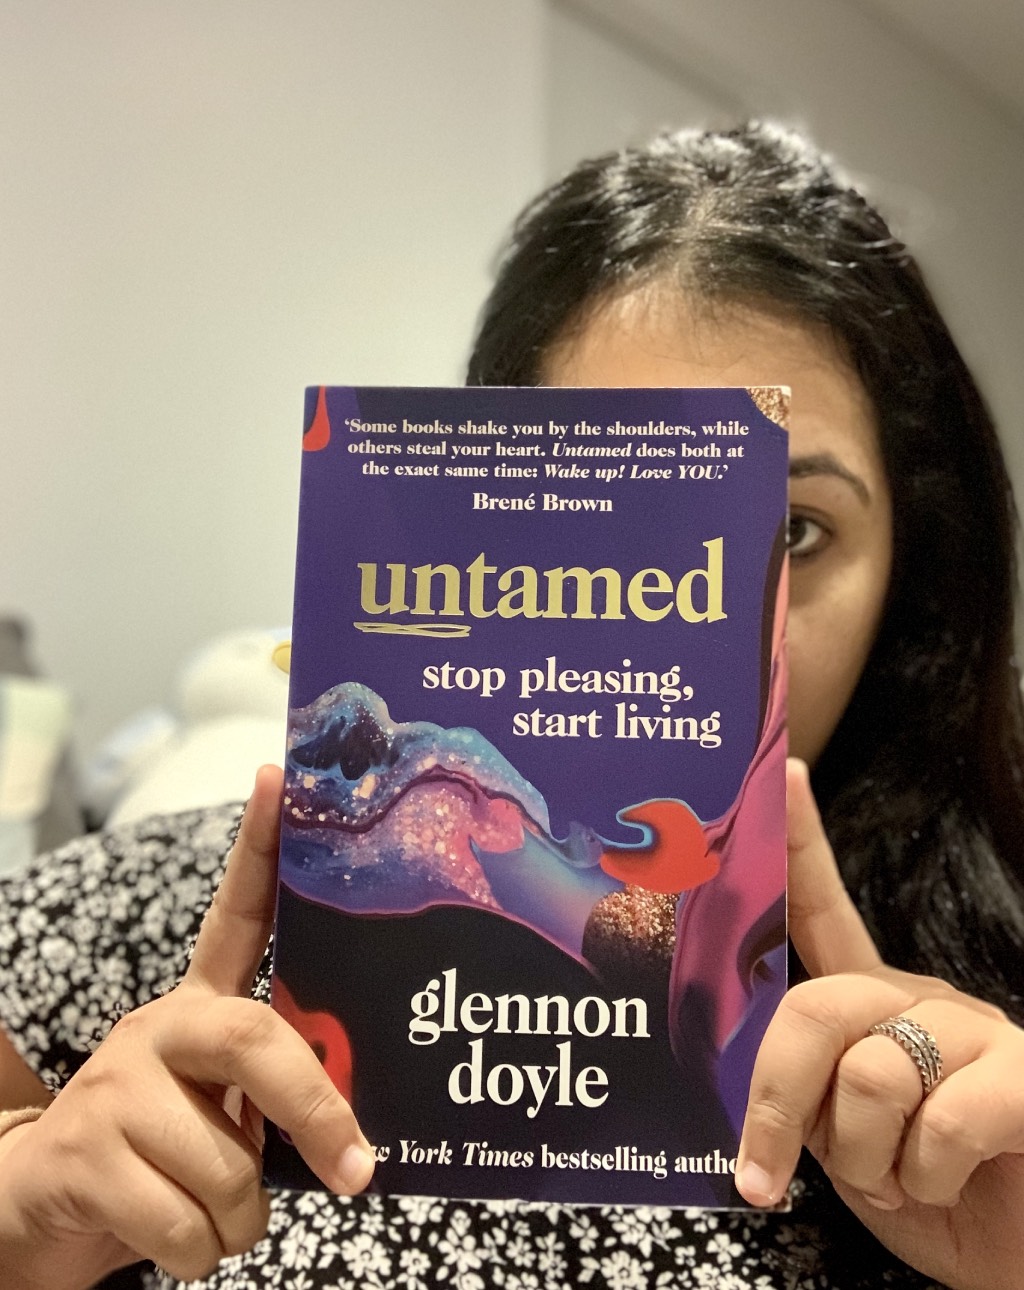 untamed book review nytimes